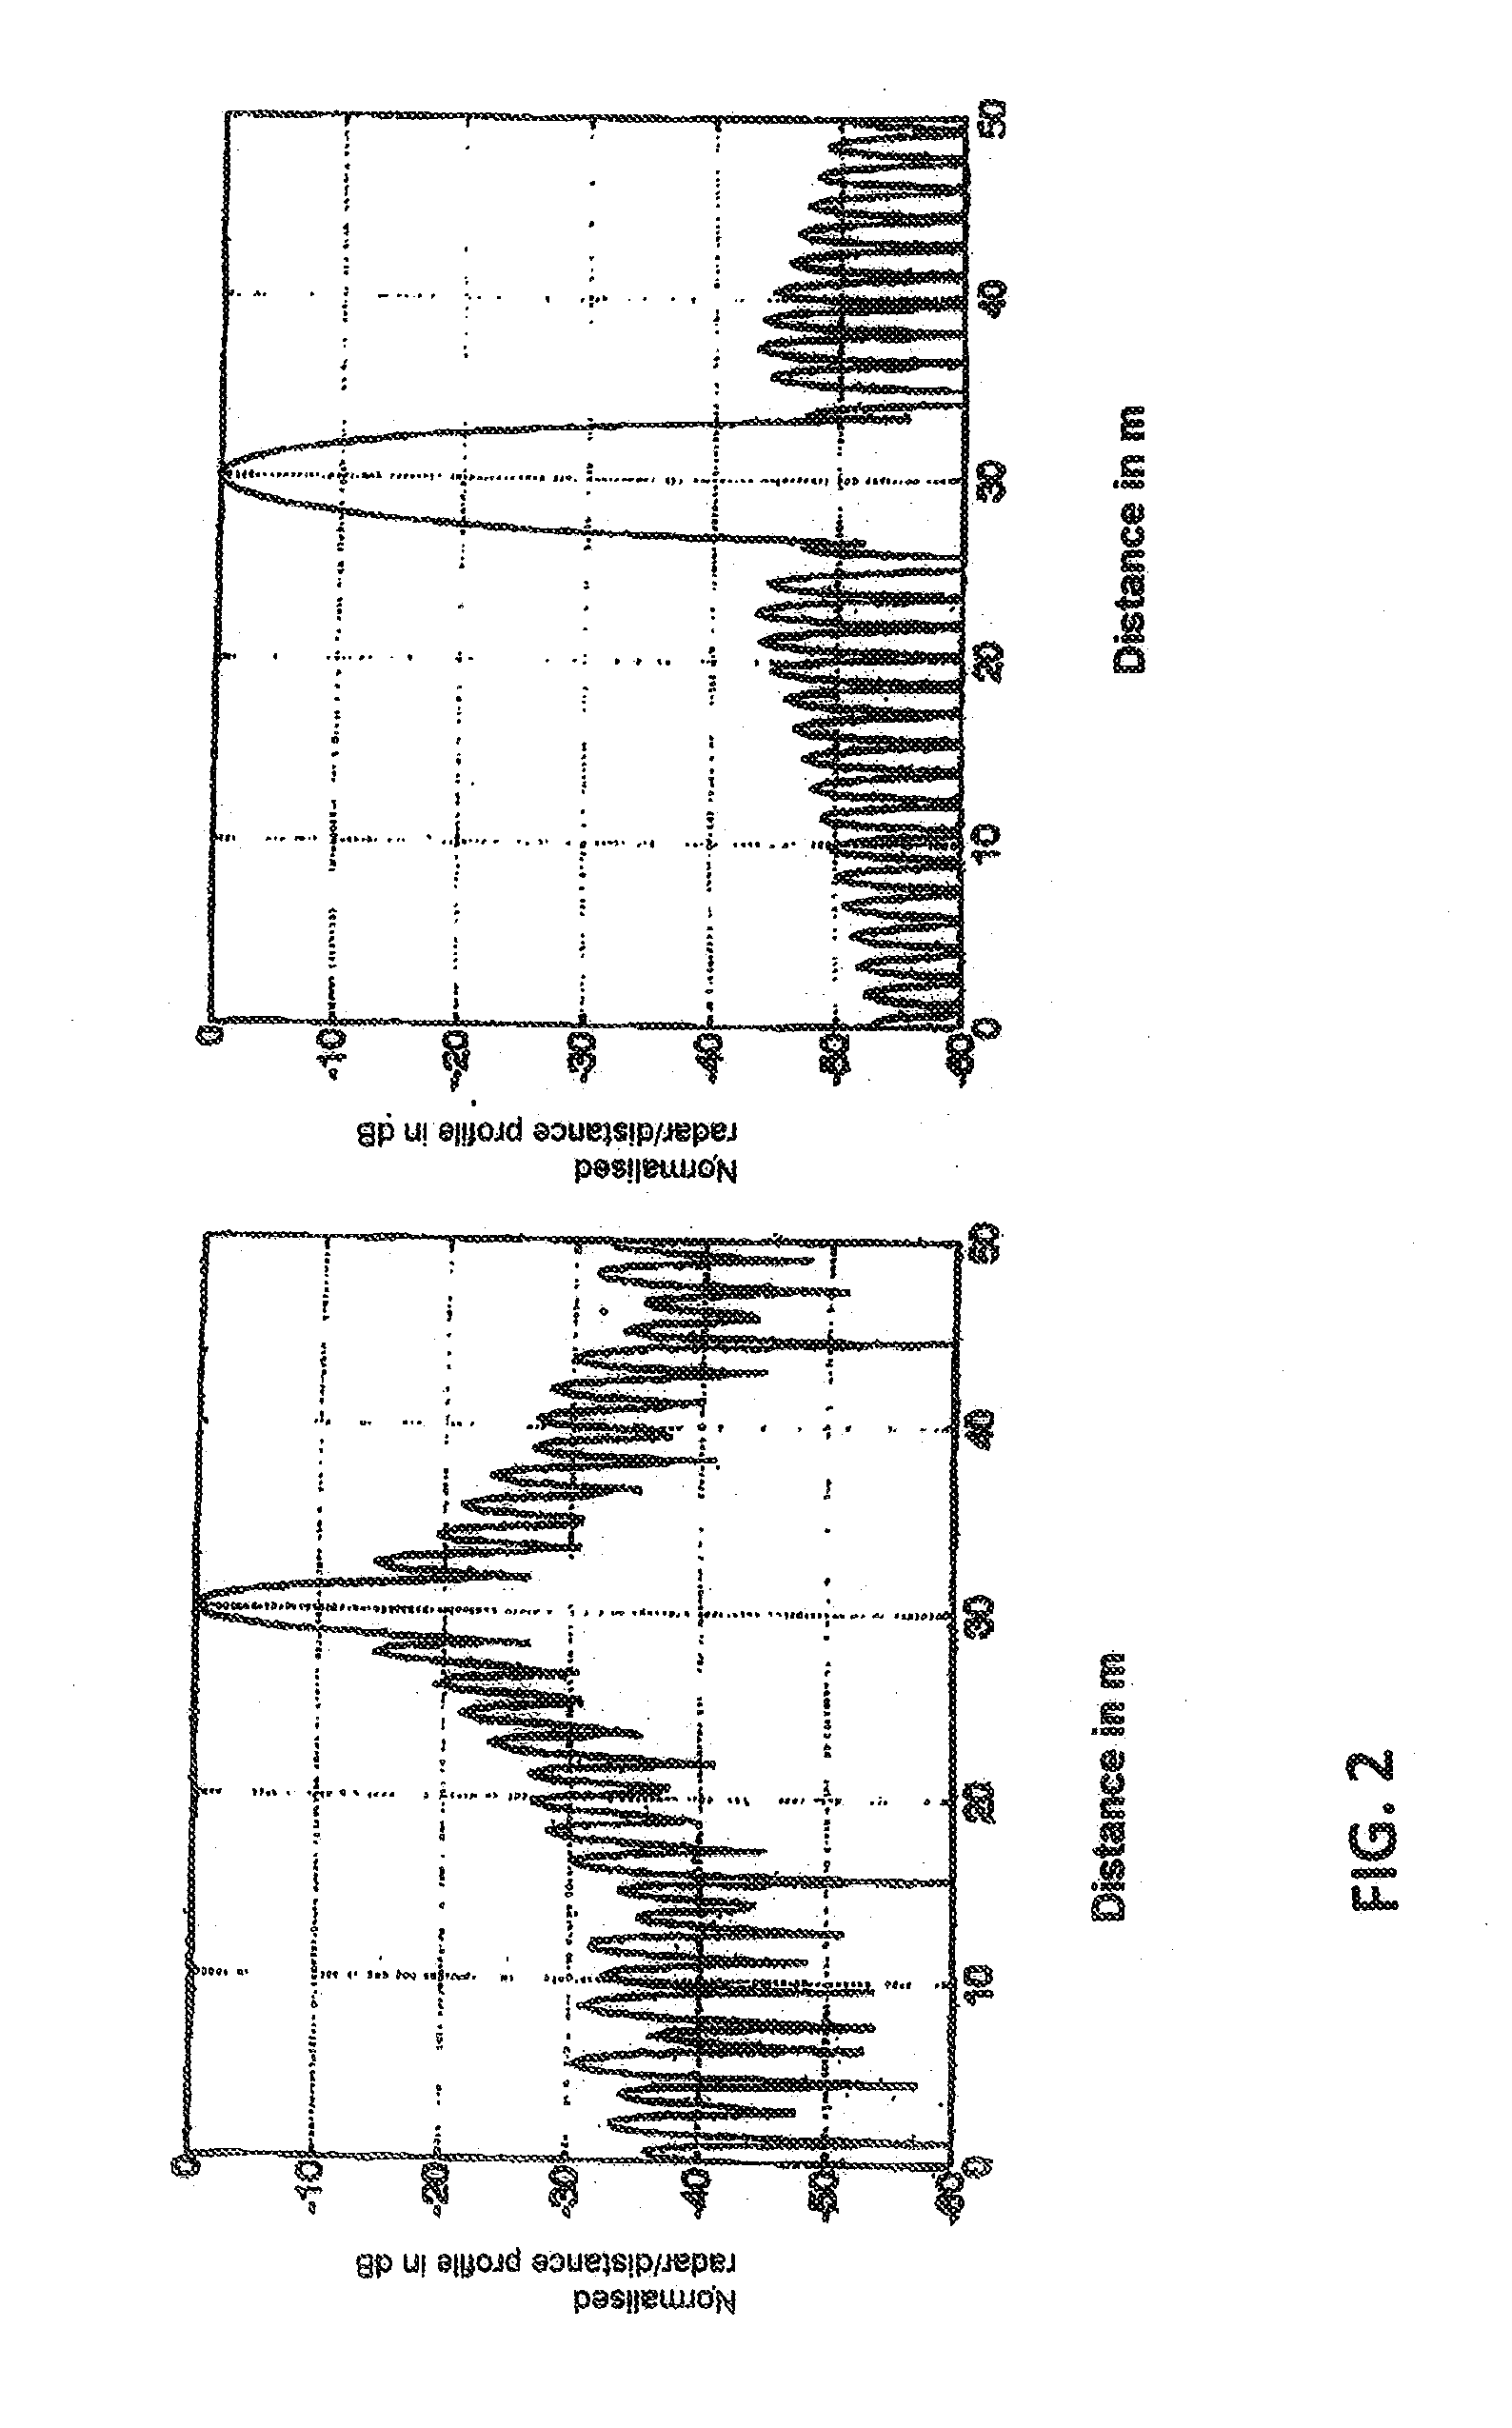 Method and apparatus for digitally processing OFDM signals for radar applications